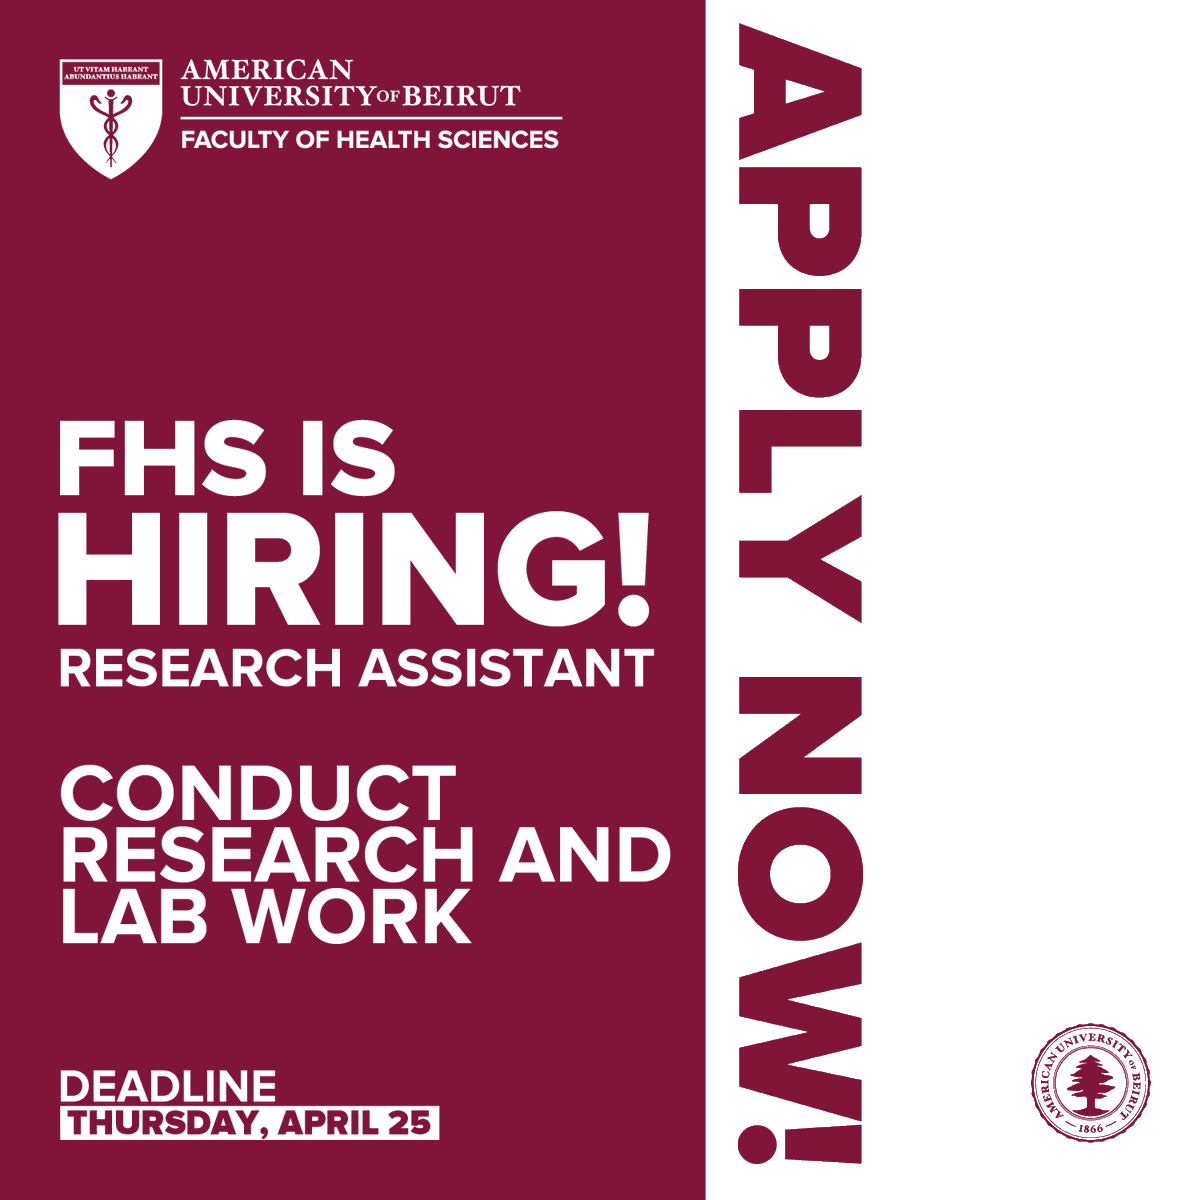 The Medical Laboratory Sciences Program of the Division of Health Professions at FHS AUB is seeking to recruit a fulltime Research Assistant to work on research projects. 👉 aub.edu.lb/fhs/Pages/empl… #FHS #AUB #MLS #Vacancy #ResearchAssistant